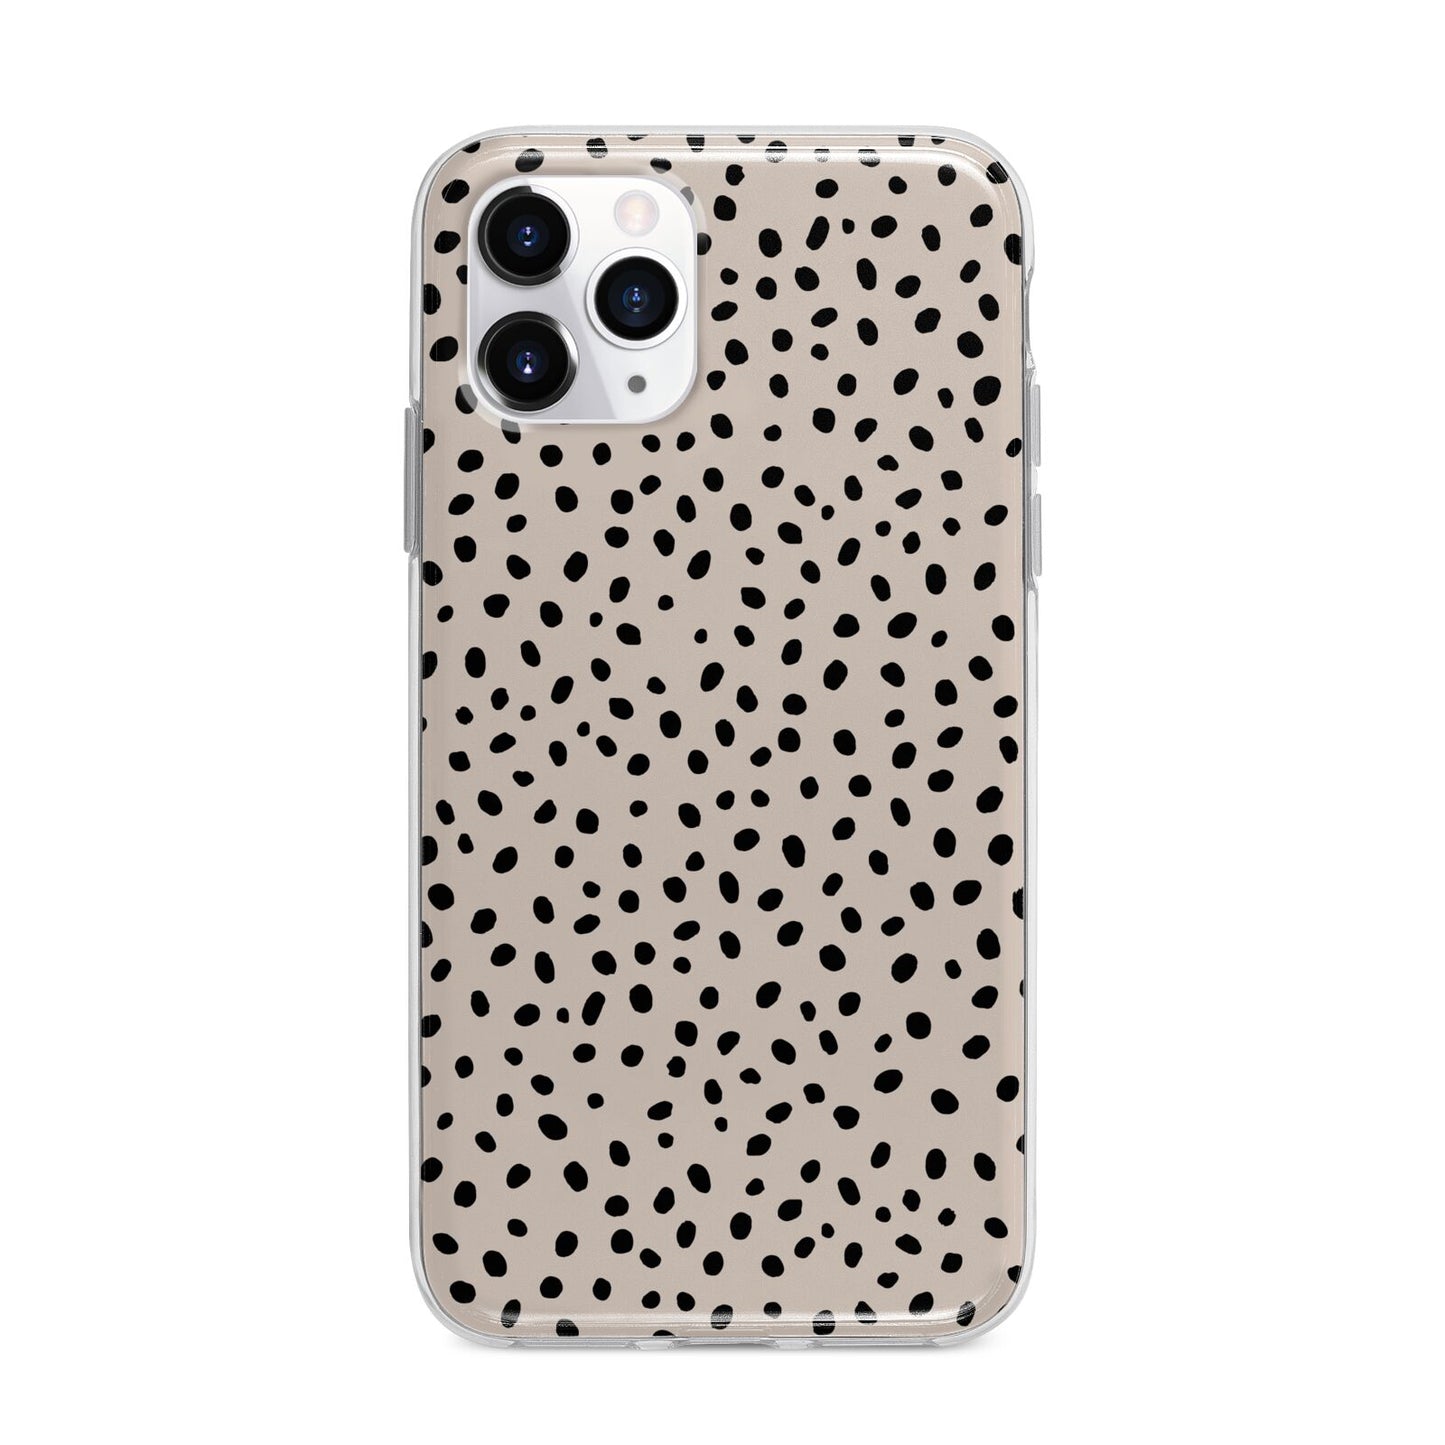 Almond Polka Dot Apple iPhone 11 Pro in Silver with Bumper Case